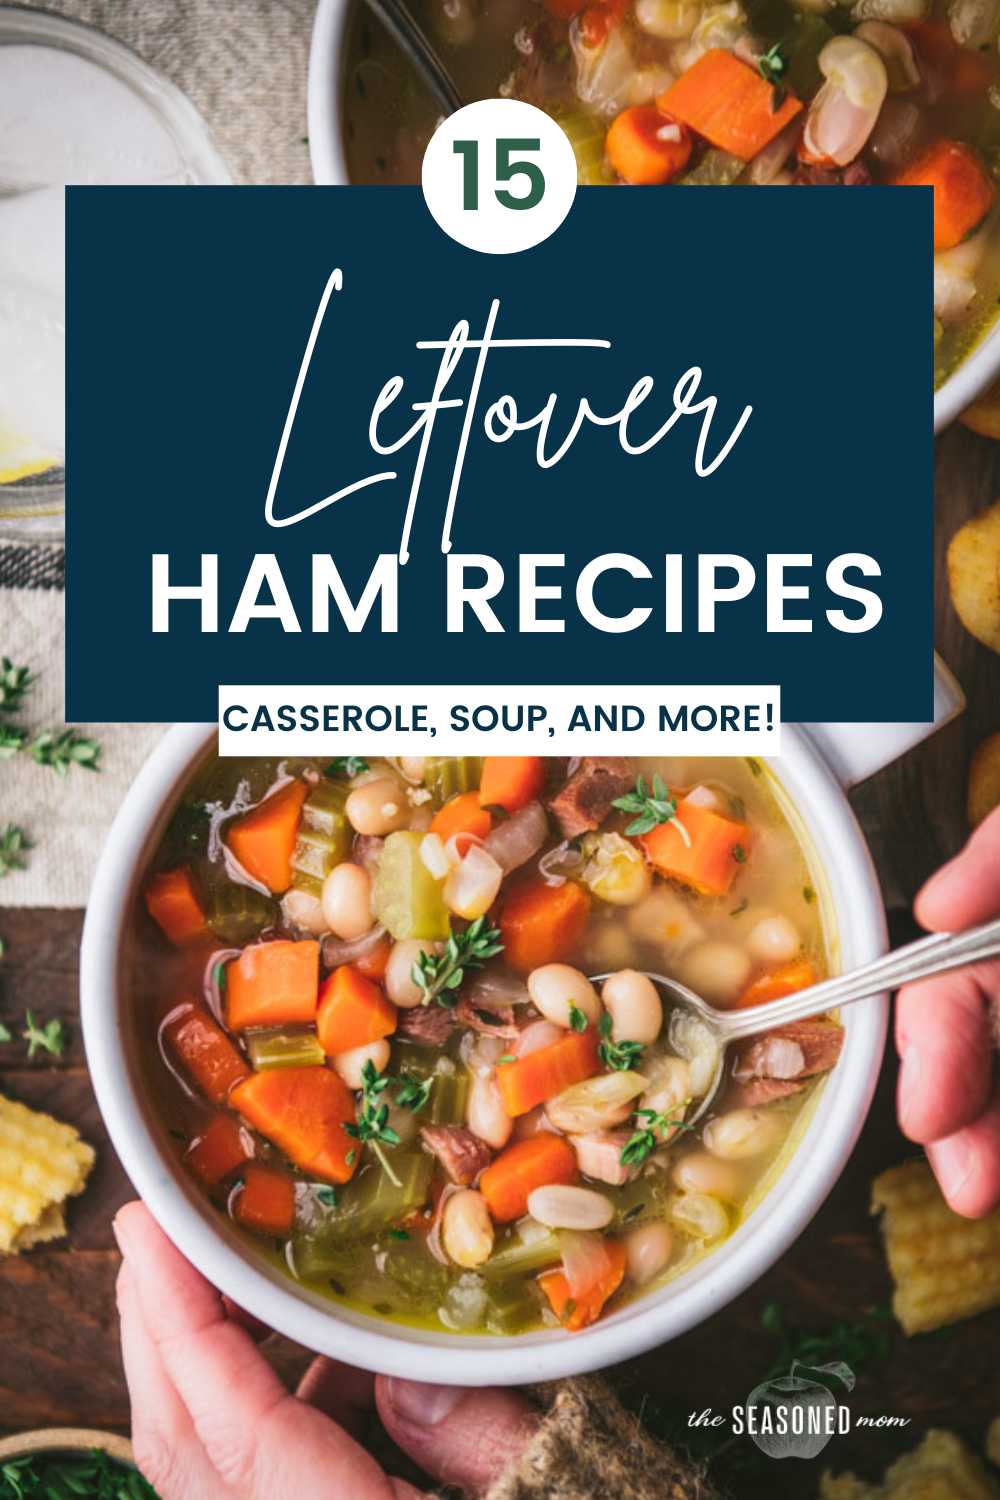 Bowl of soup with text title overlay for recipes for leftover ham collage